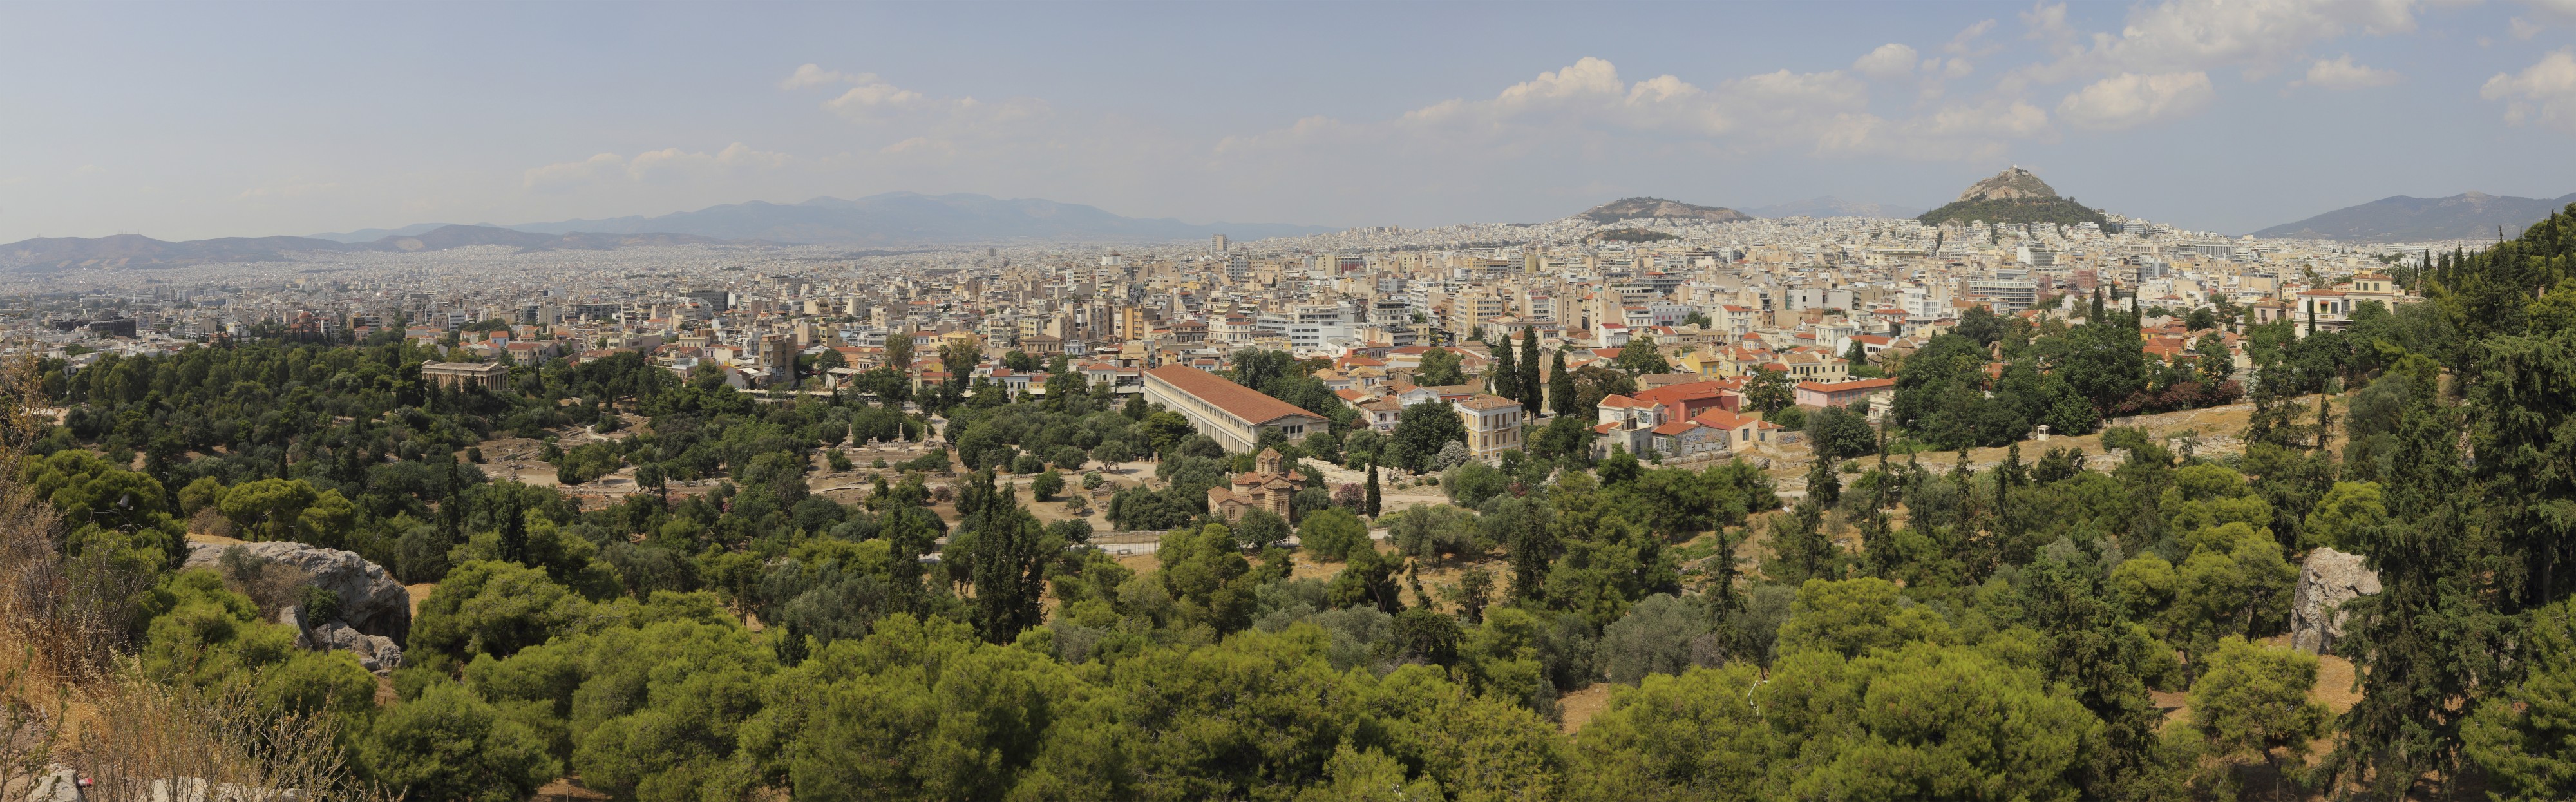 Attica 06-13 Athens 20 View from Acropolis Hill - pano